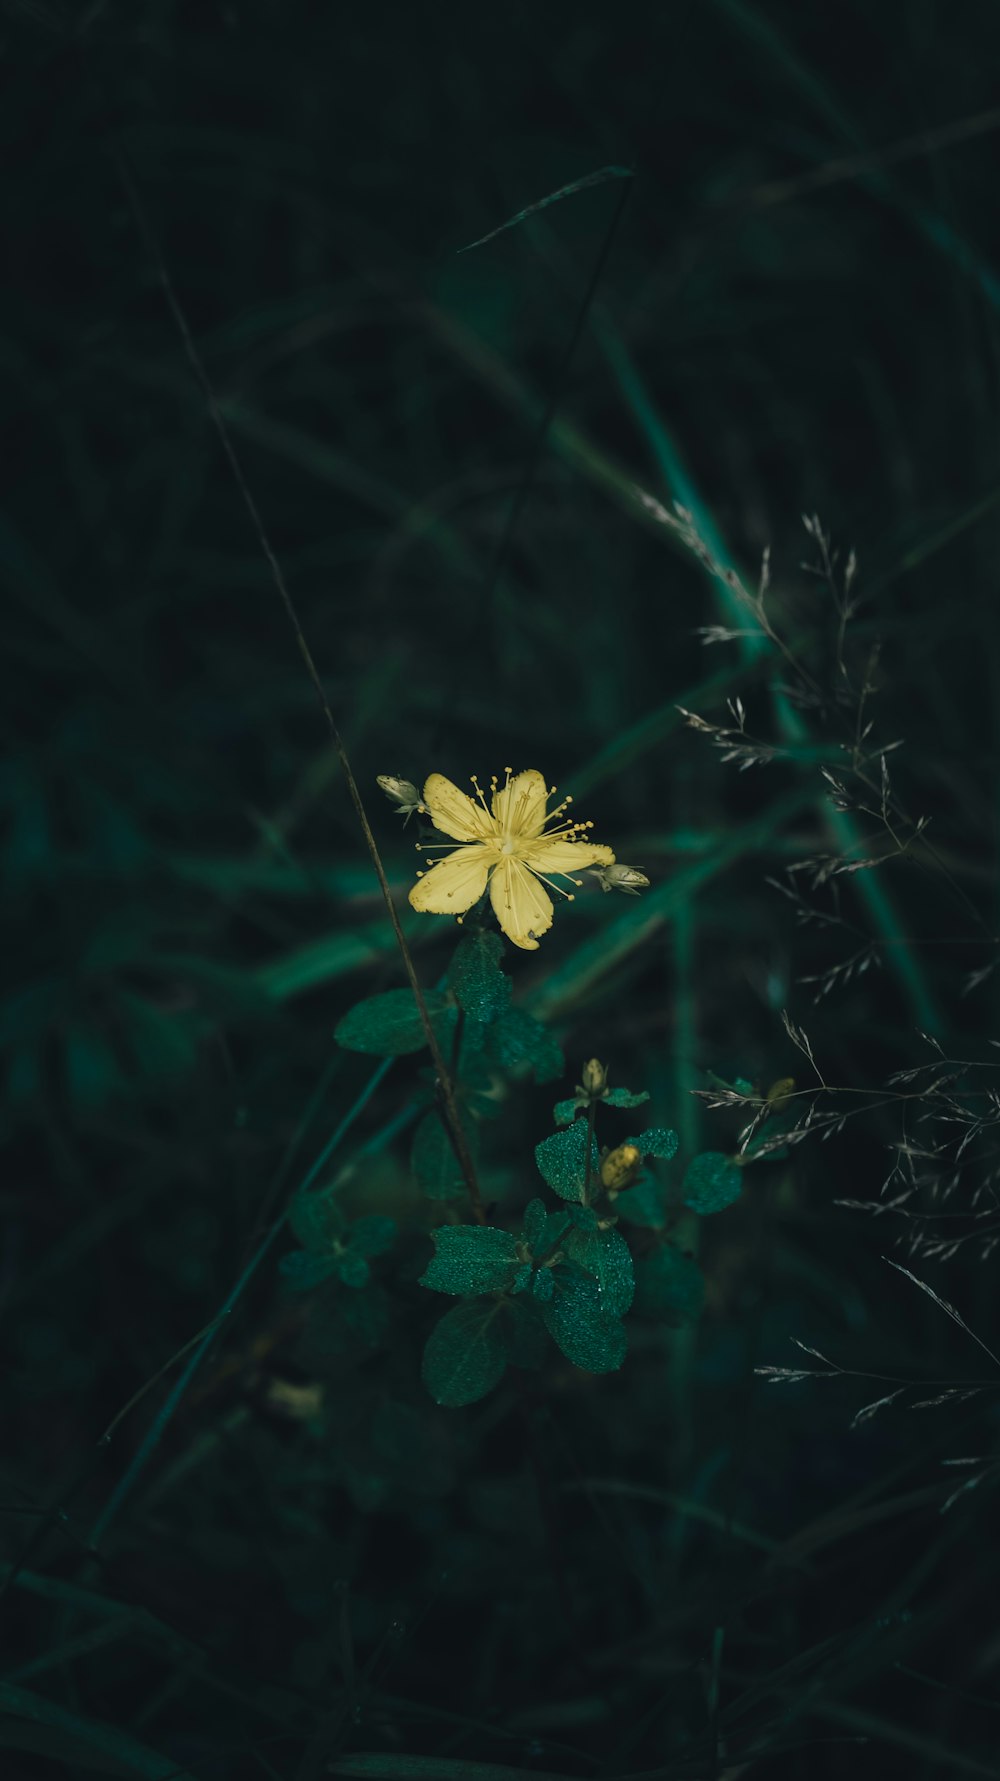 a small yellow flower sitting on top of a lush green field